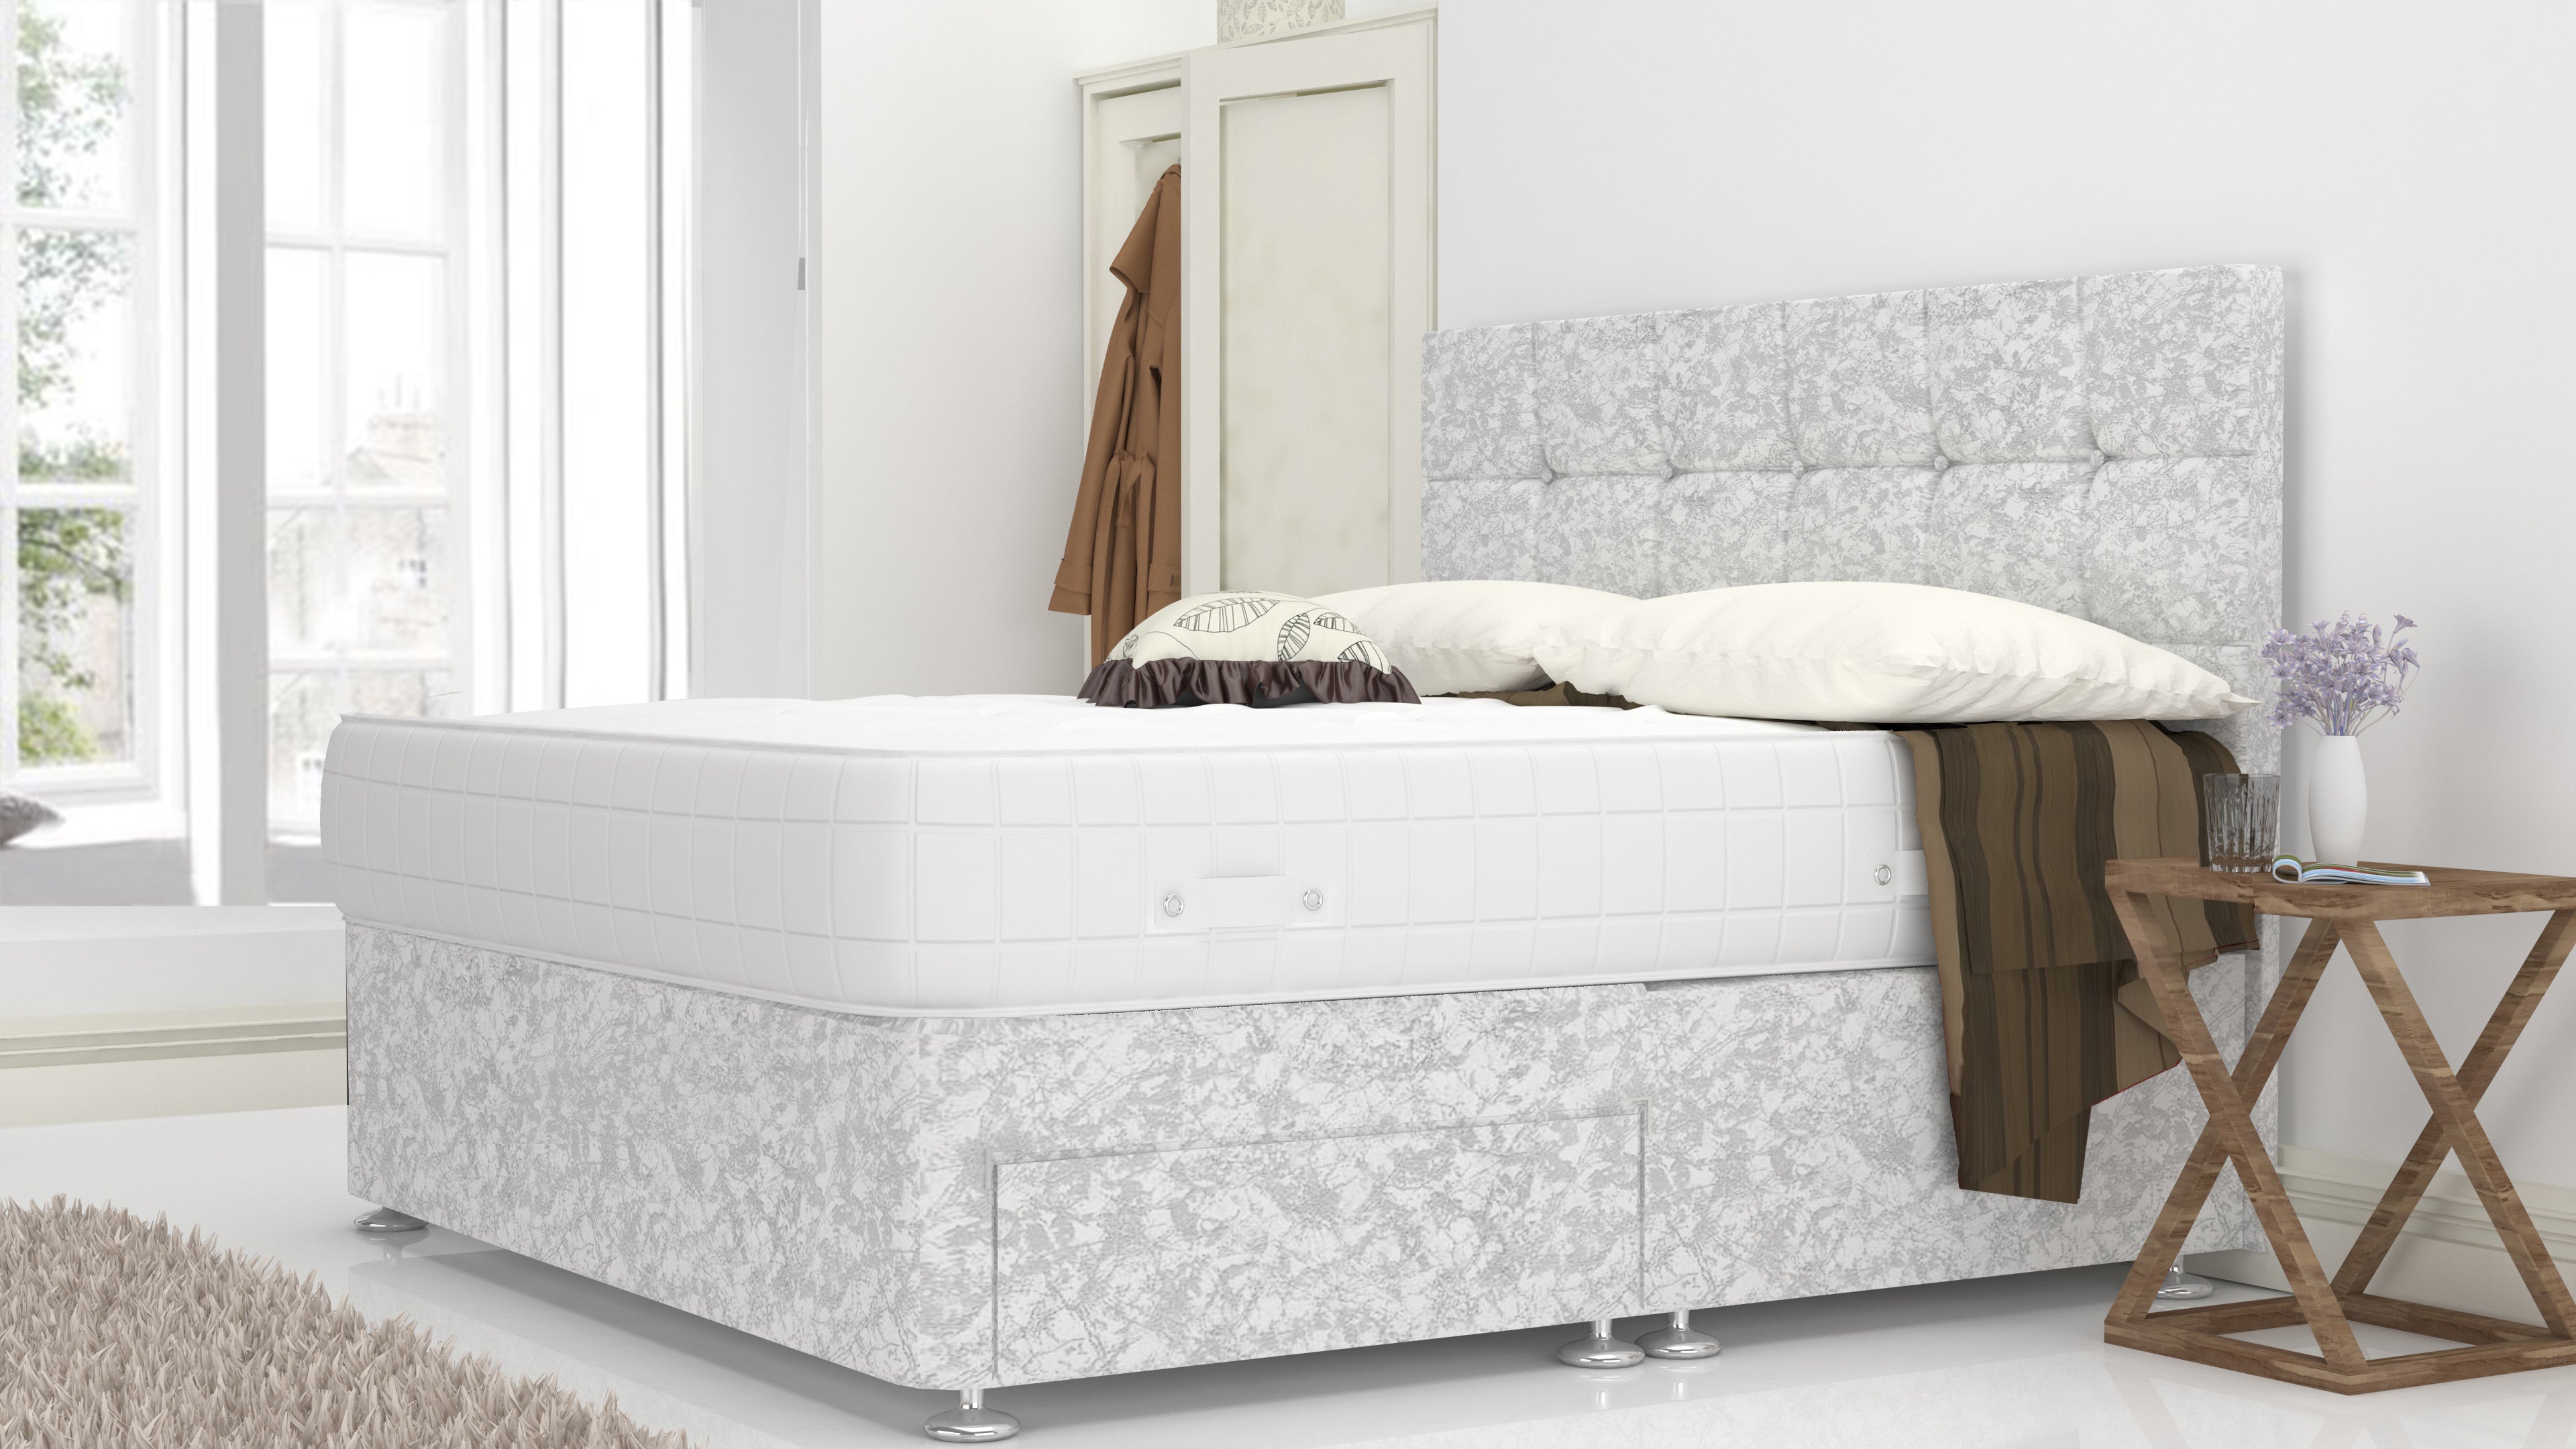 White Crushed Velvet 4FT 6" Divan Bed With Cube Headboard (Included Feet) And Free Orthopedic Mattress